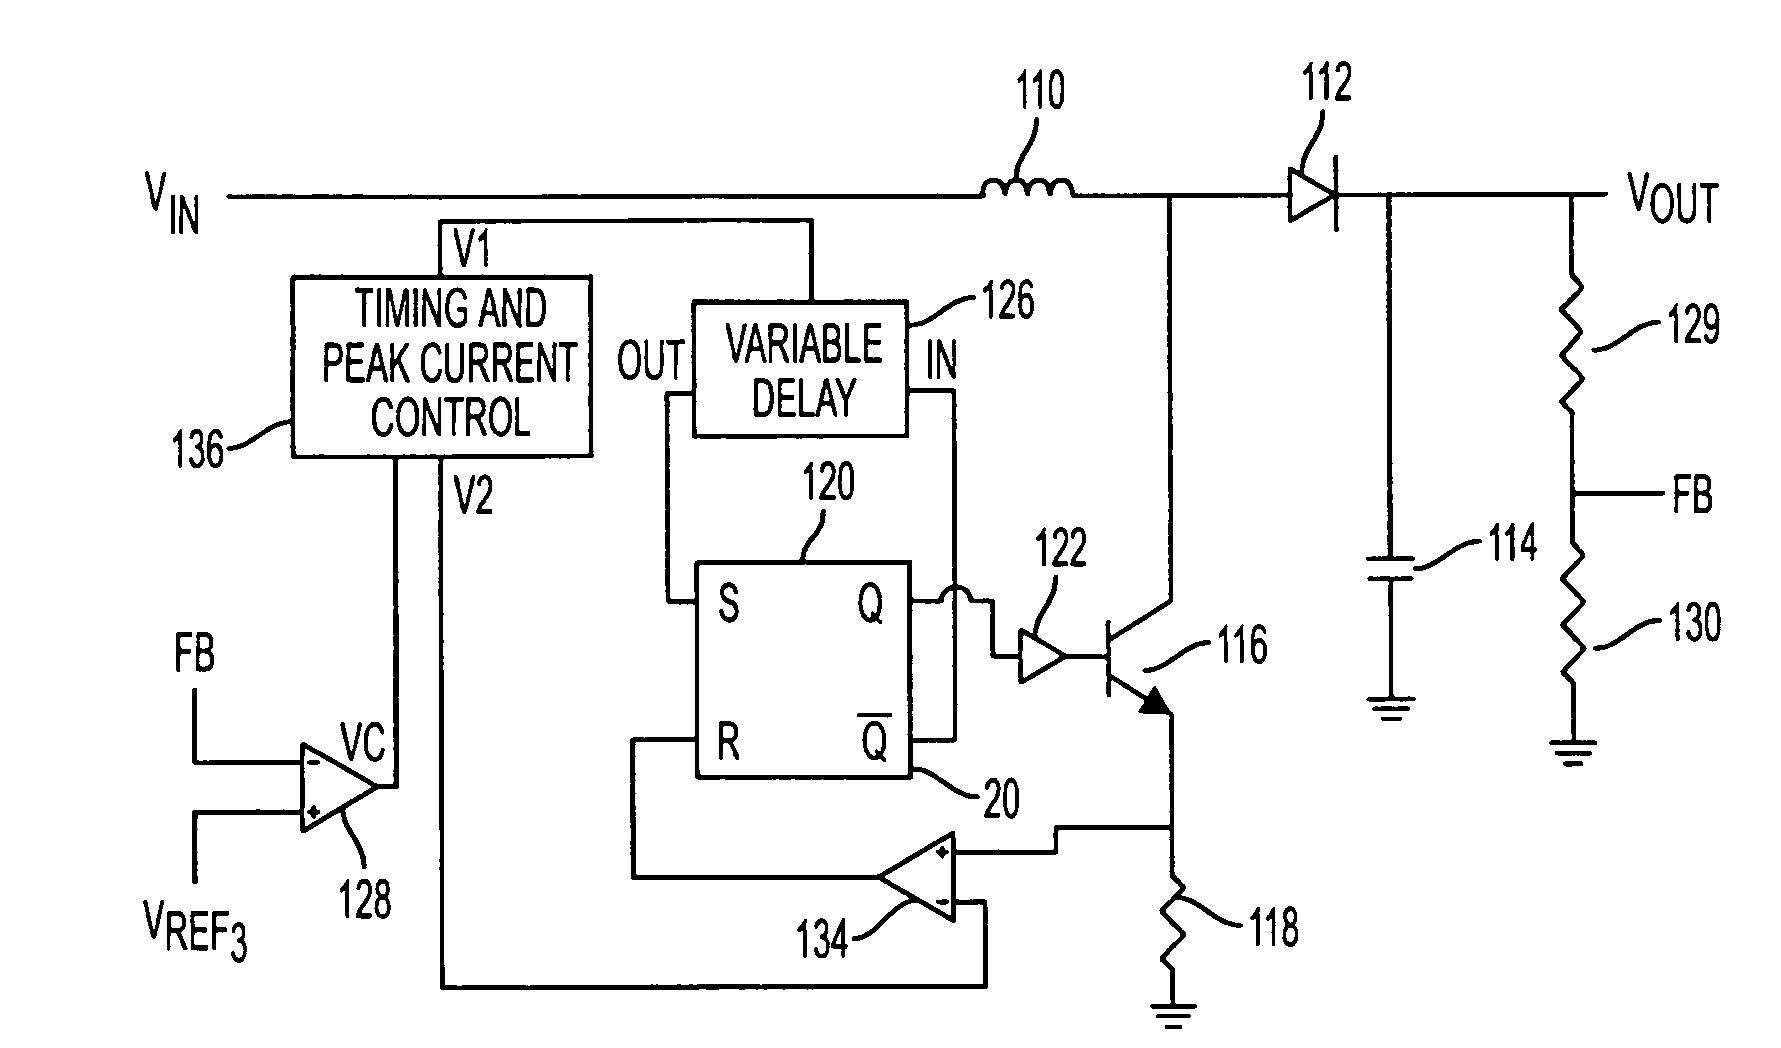 Switched converter with variable peak current and variable off-time control